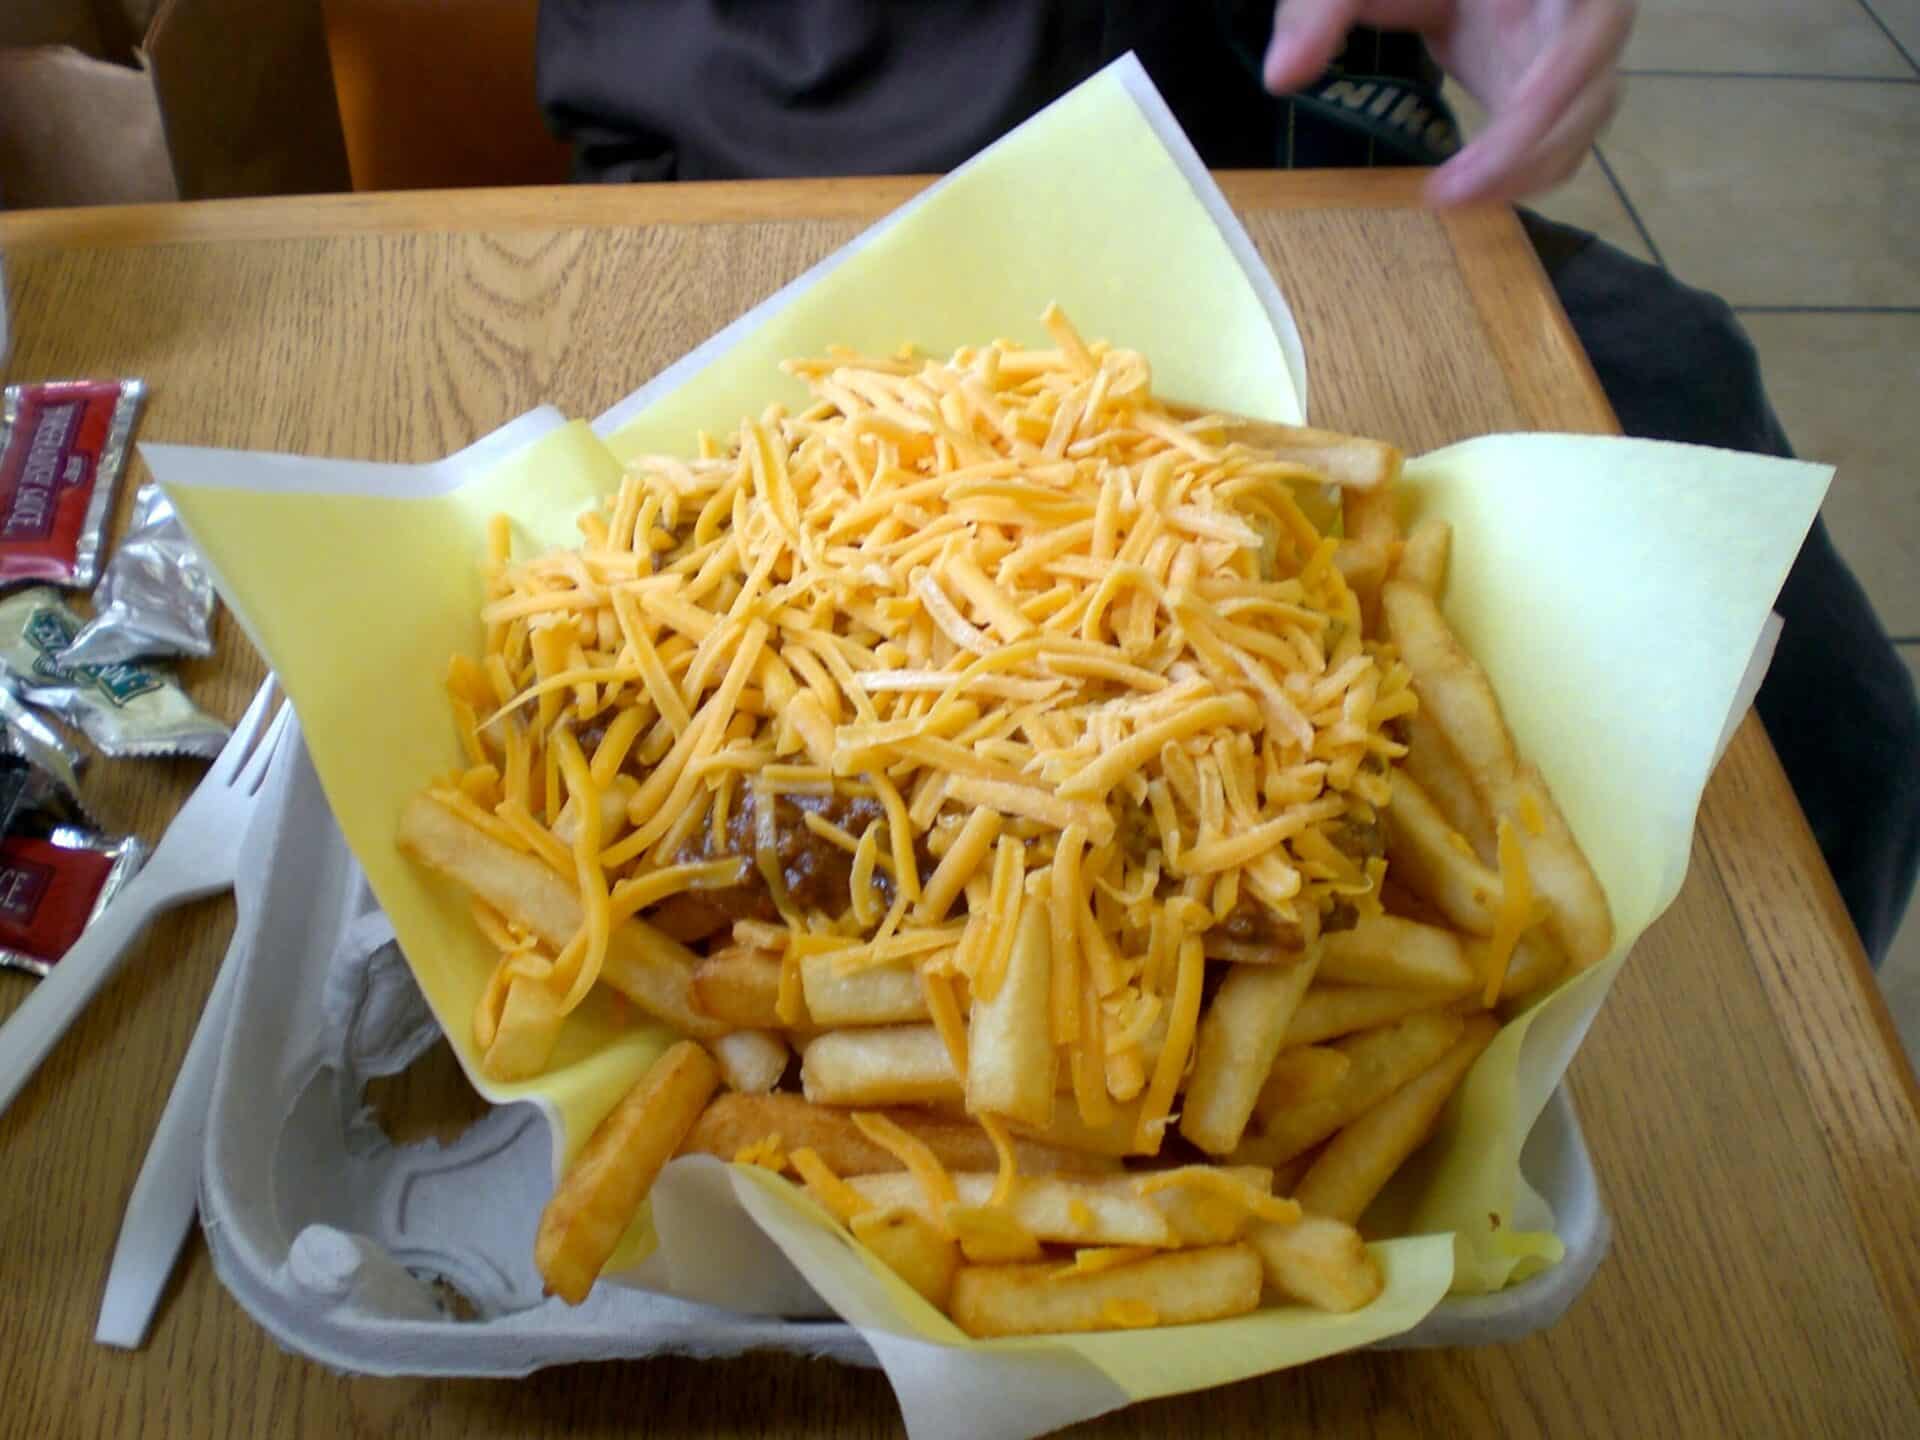 How To Keep Fries From Getting Soggy